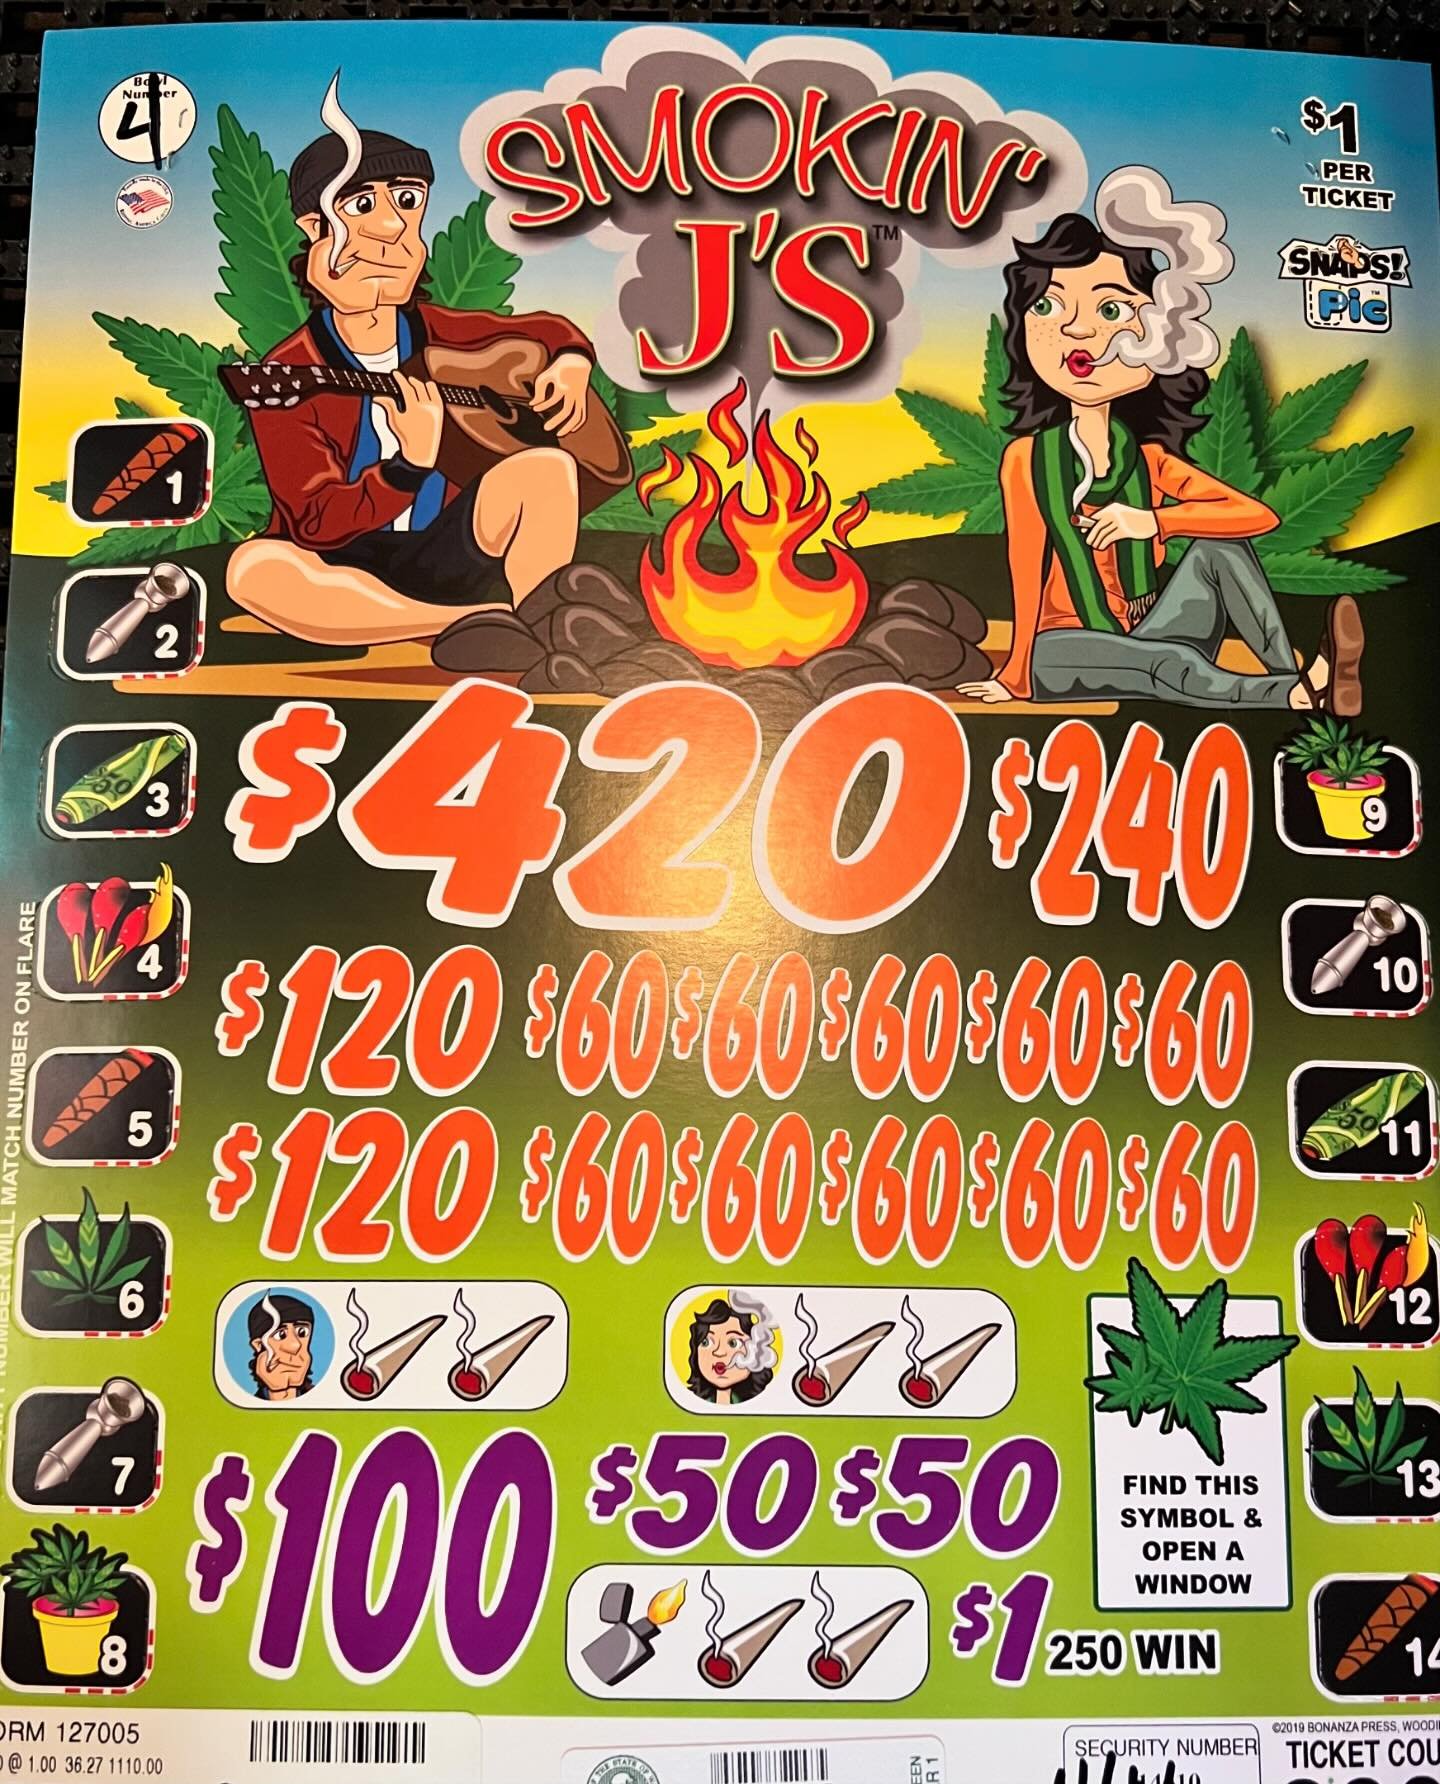 Bin number 420 is on double payout tomorrow!! Join us in this pull tab frenzy. No hold game!  Come through! #happy420 #pulltabs #divebars